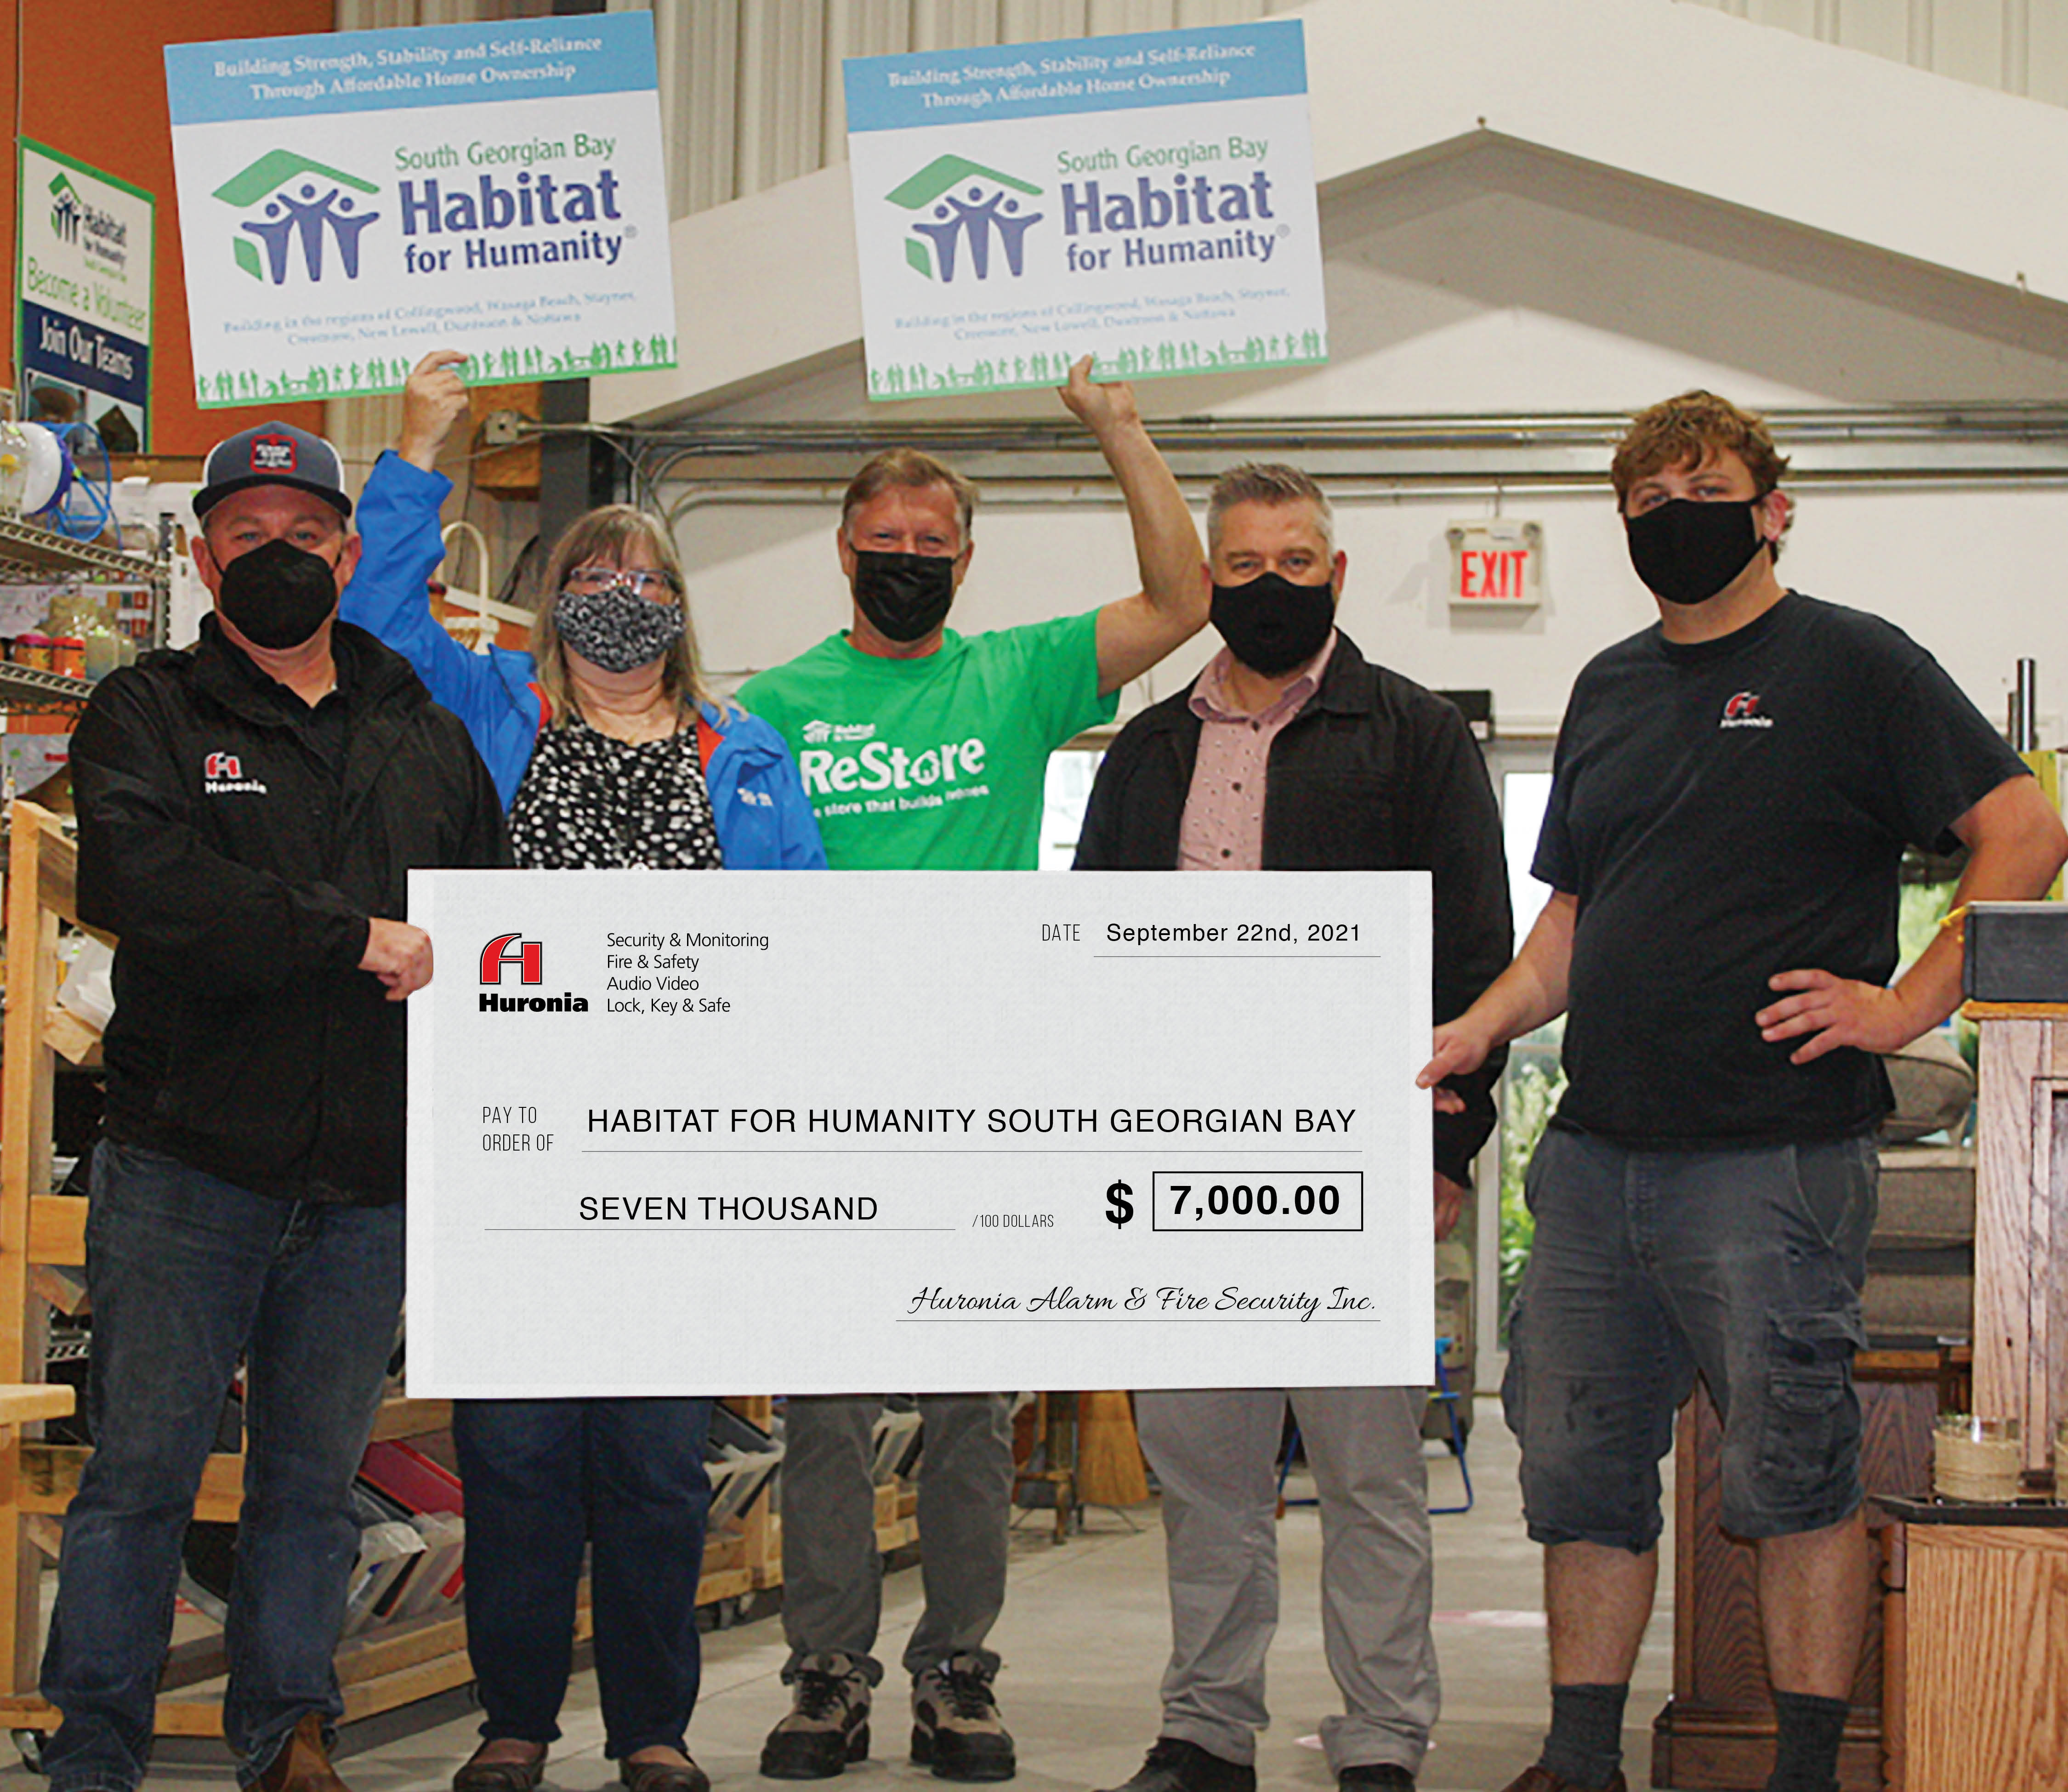 Huronia Alarm & Fire Security Inc. makes donation-in-kind to Habitat for Humanity South Georgian Bay